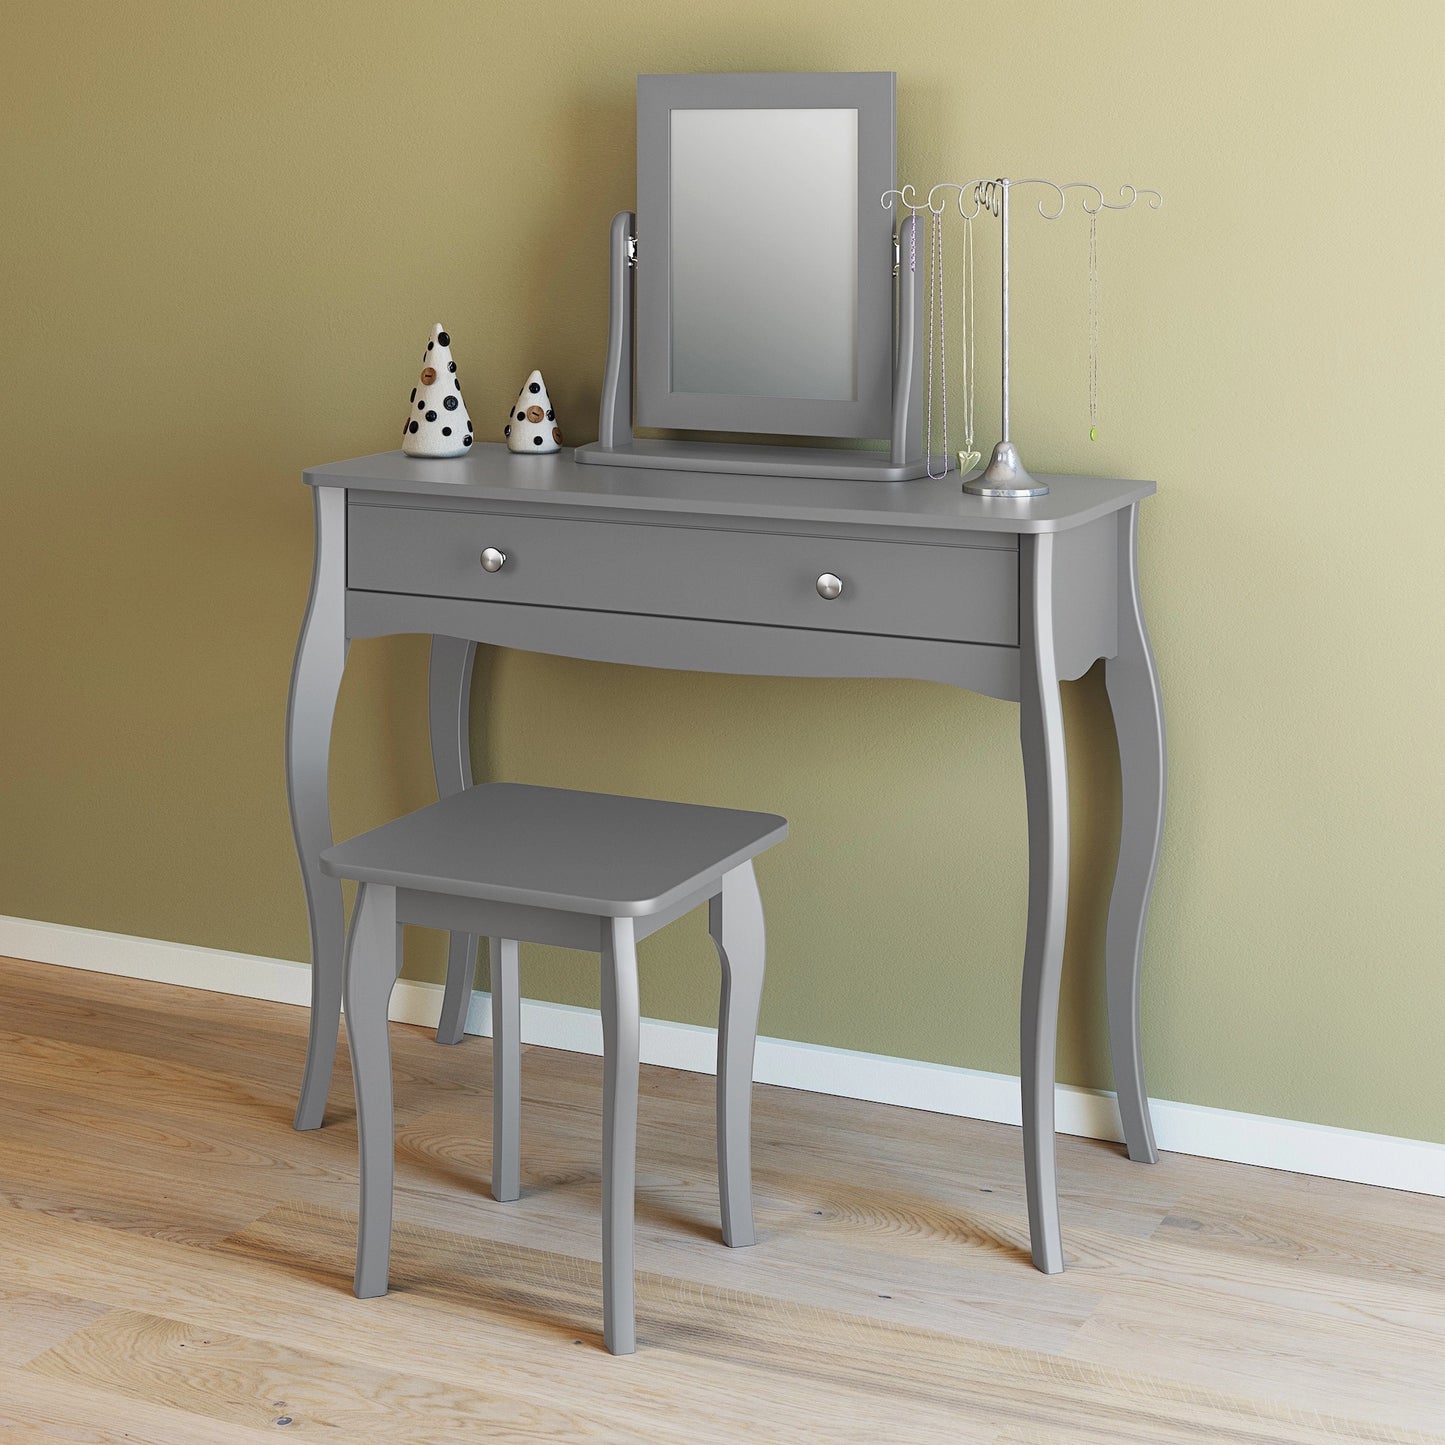 Furniture To Go Baroque Stool Grey